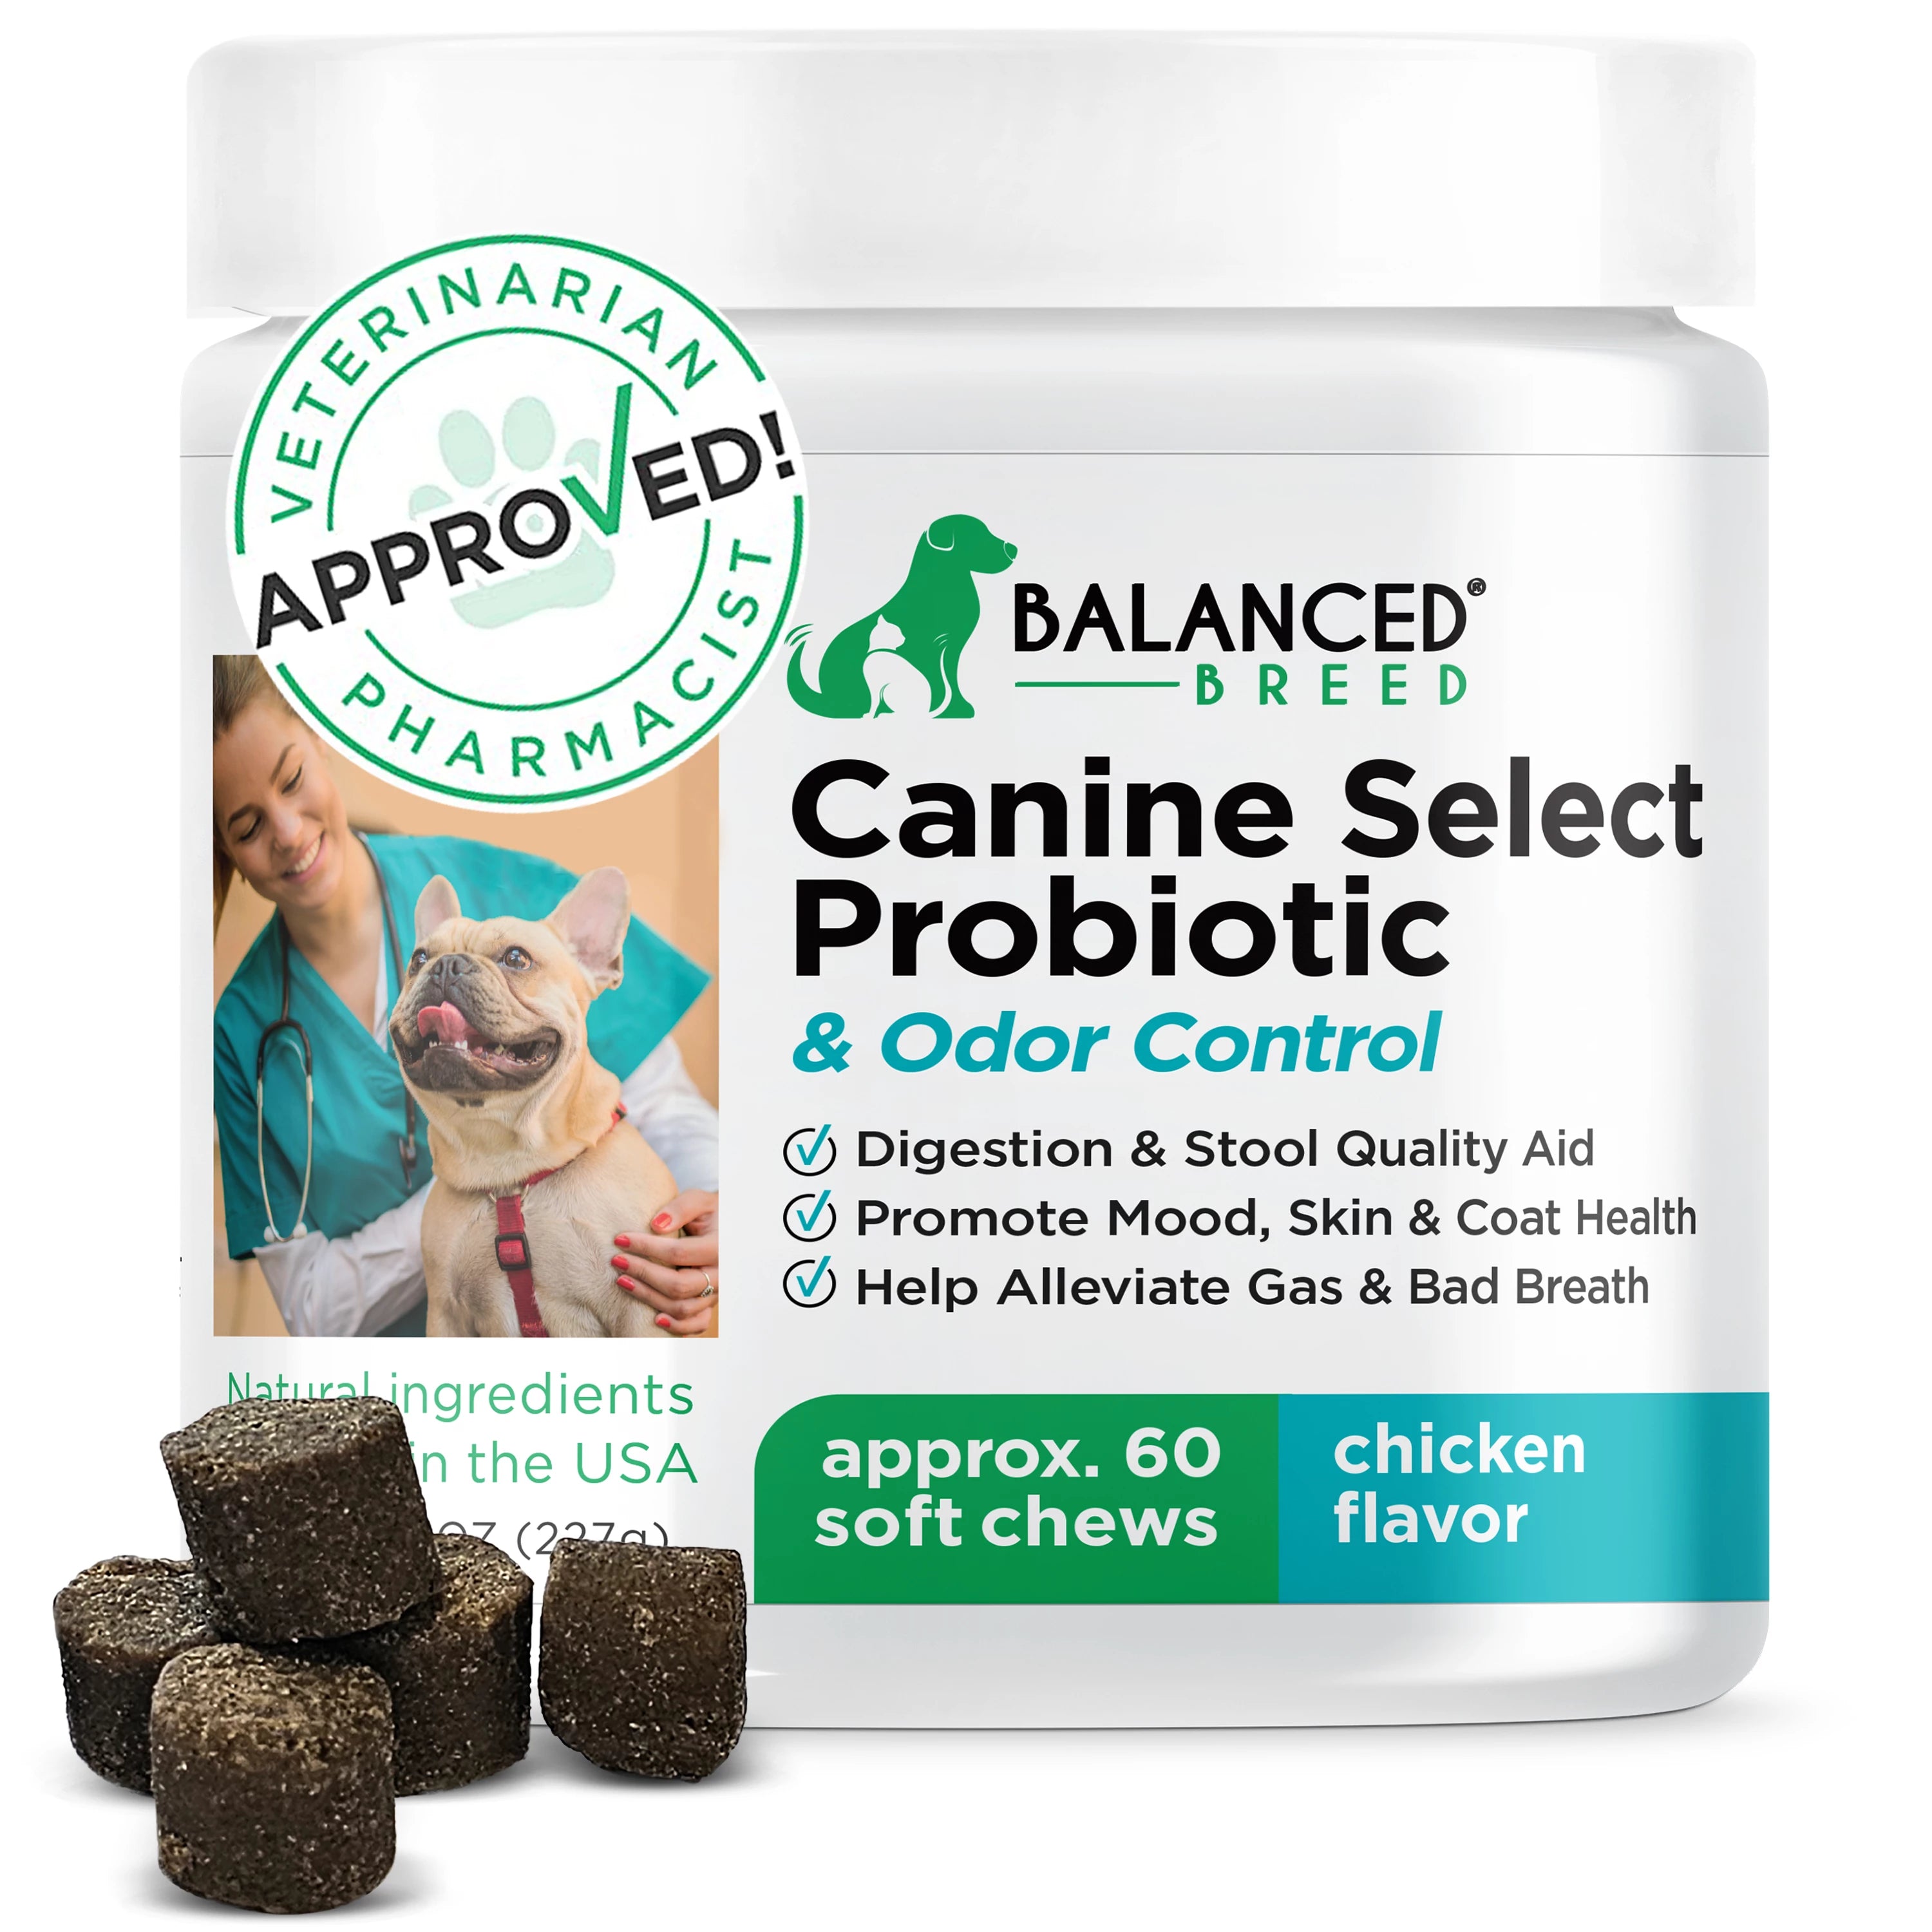 Canine Select Probiotic for digestion